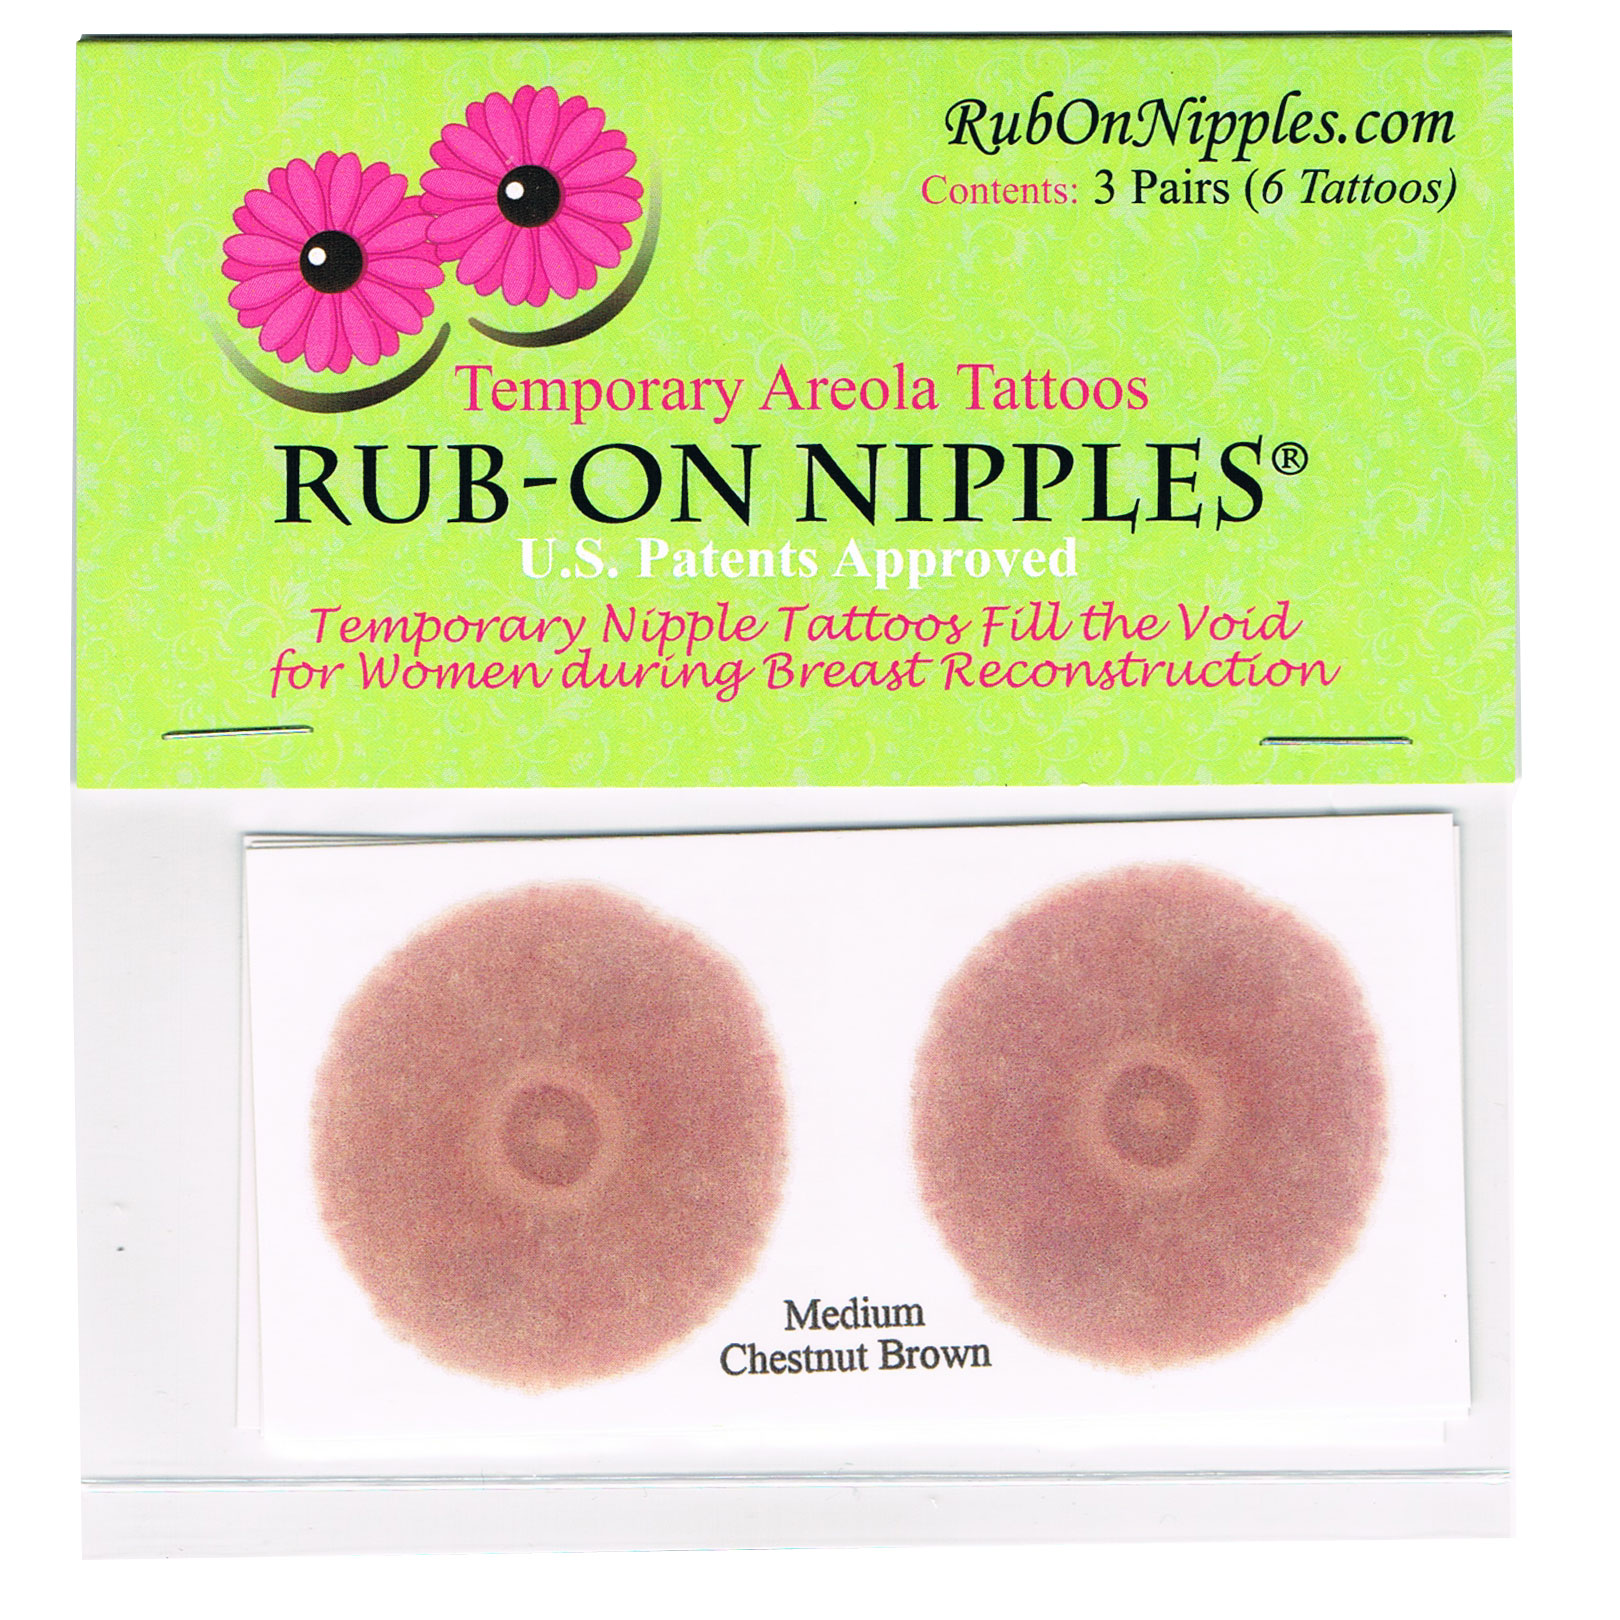 About Rub-On Nipples® - Breast Healing